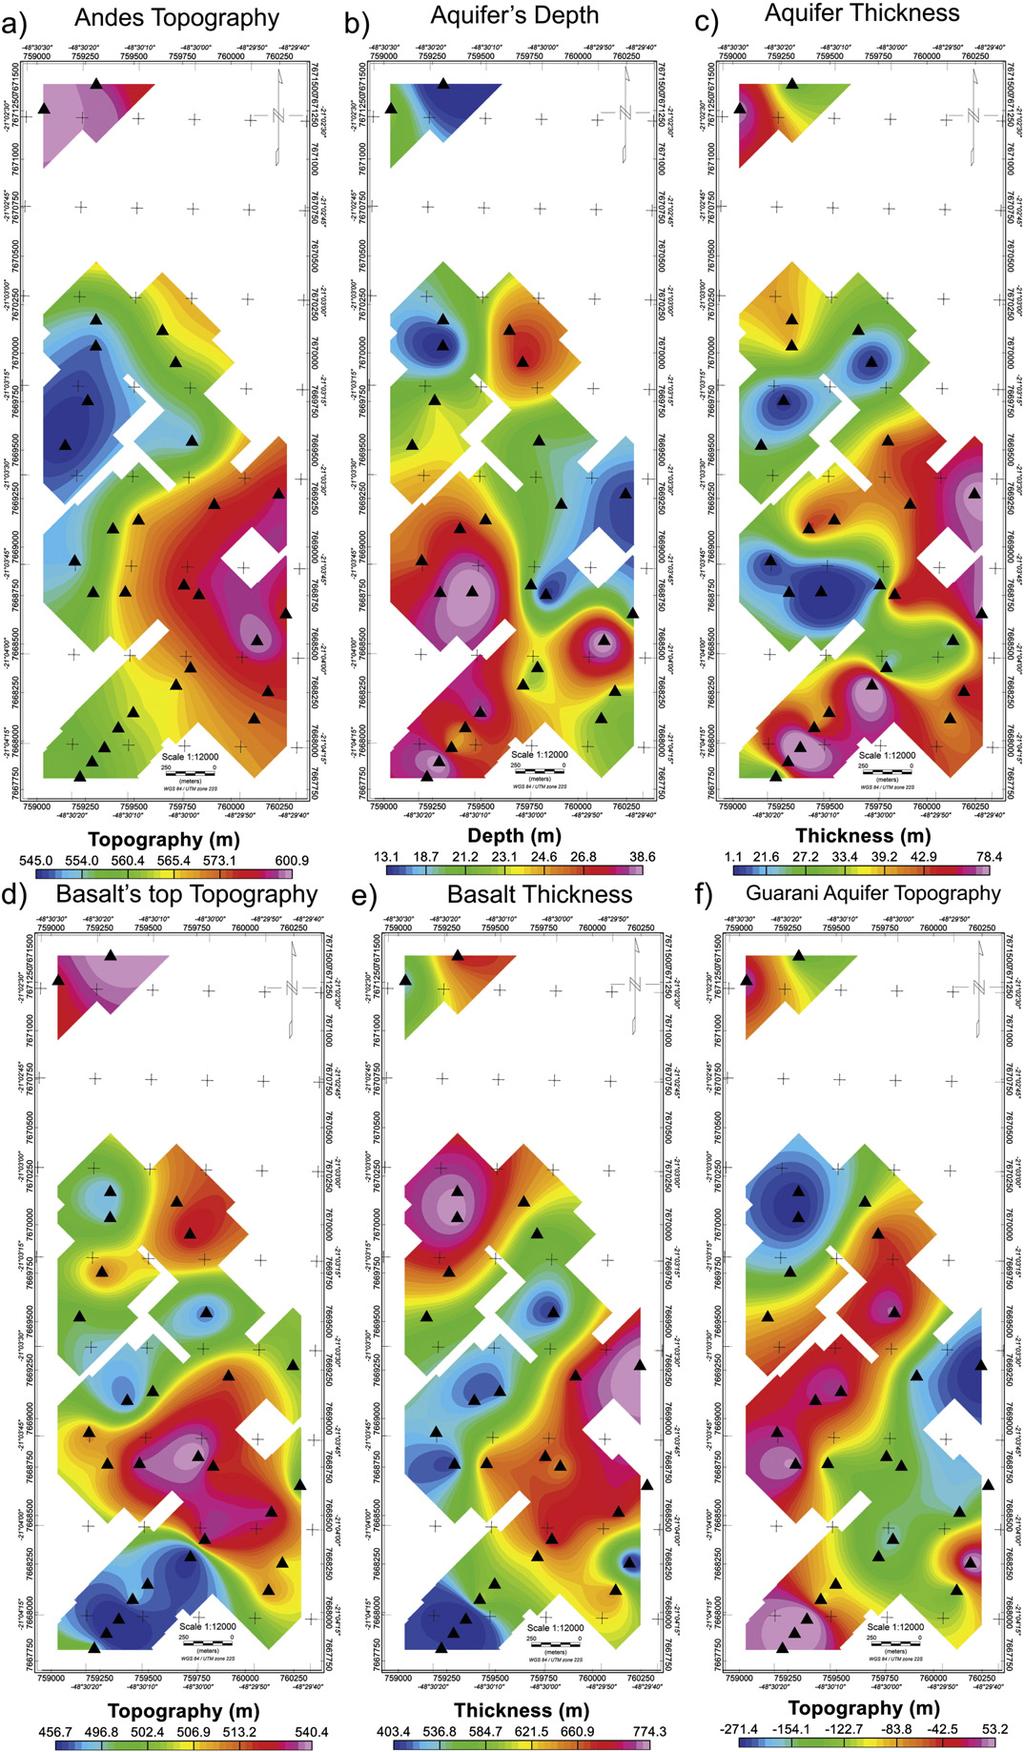 C.A. Bortolozo et al. / Journal of Applied Geophysics 111 (2014) 33 46 41 Fig. 8. Results from individual inversion of TEM data in the Andes district.